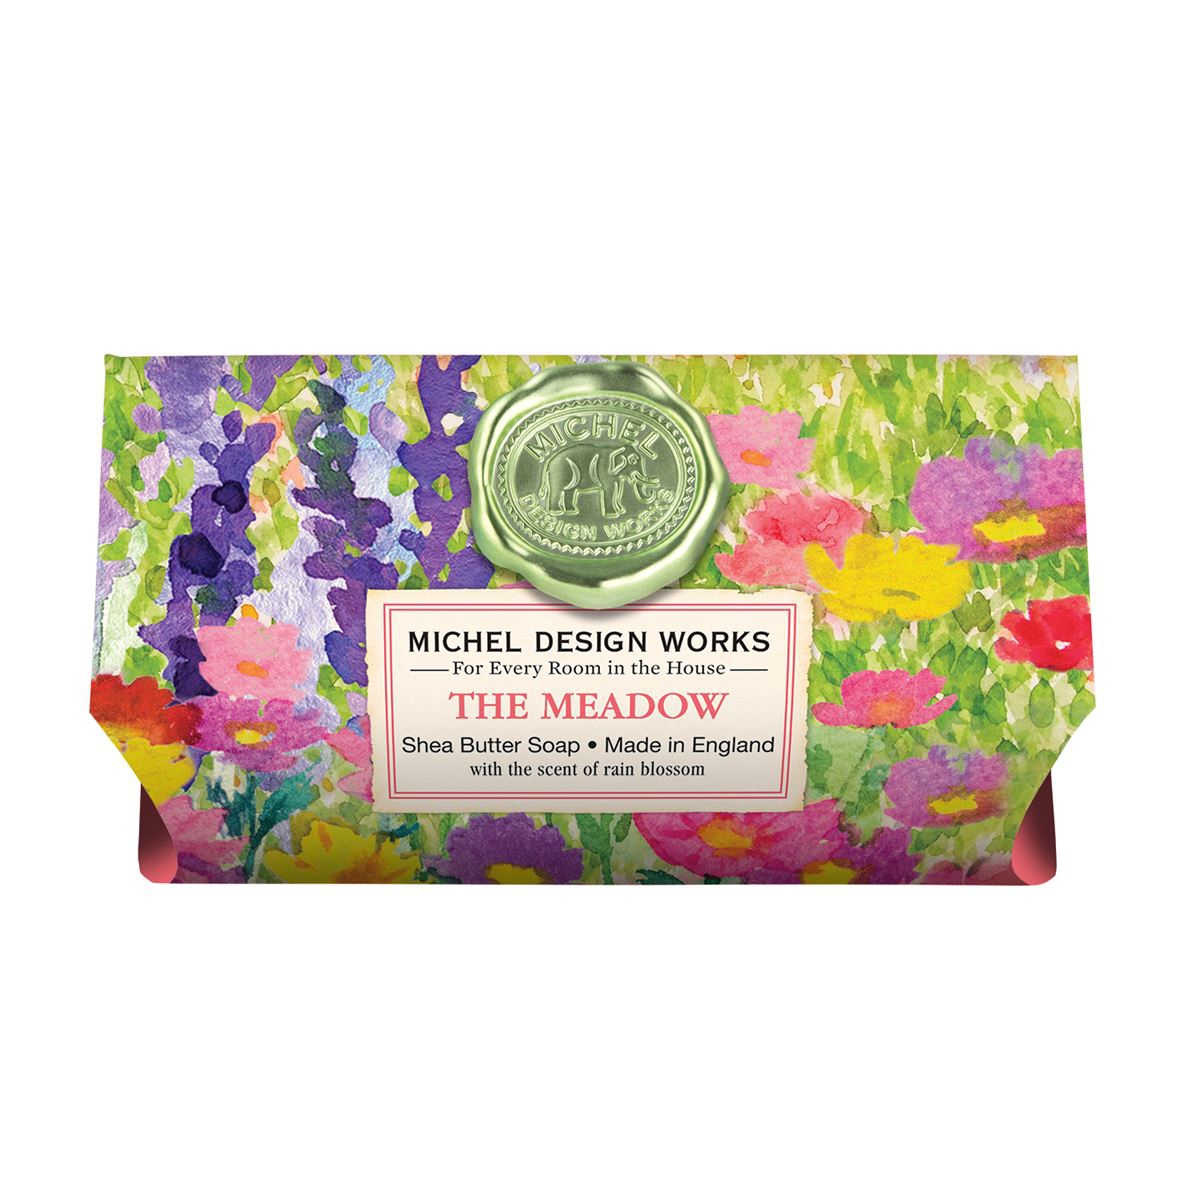 The Meadow Large Soap Bar 246g Michel Design